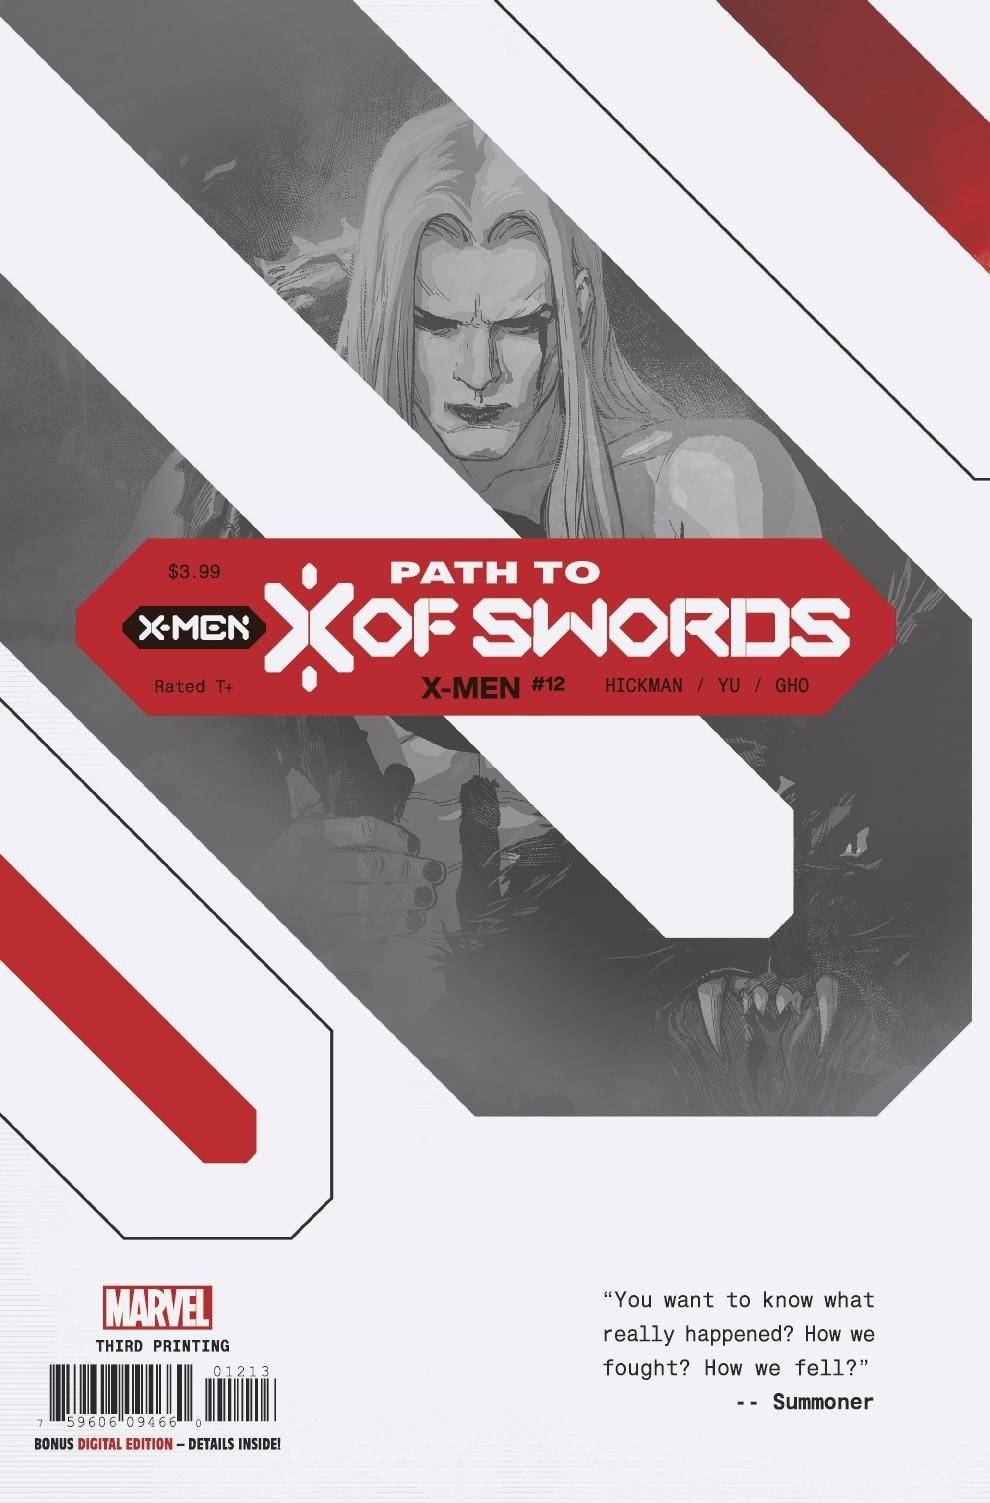 X-Men (2019) #12 3rd Printing Variant Path to X of Swords